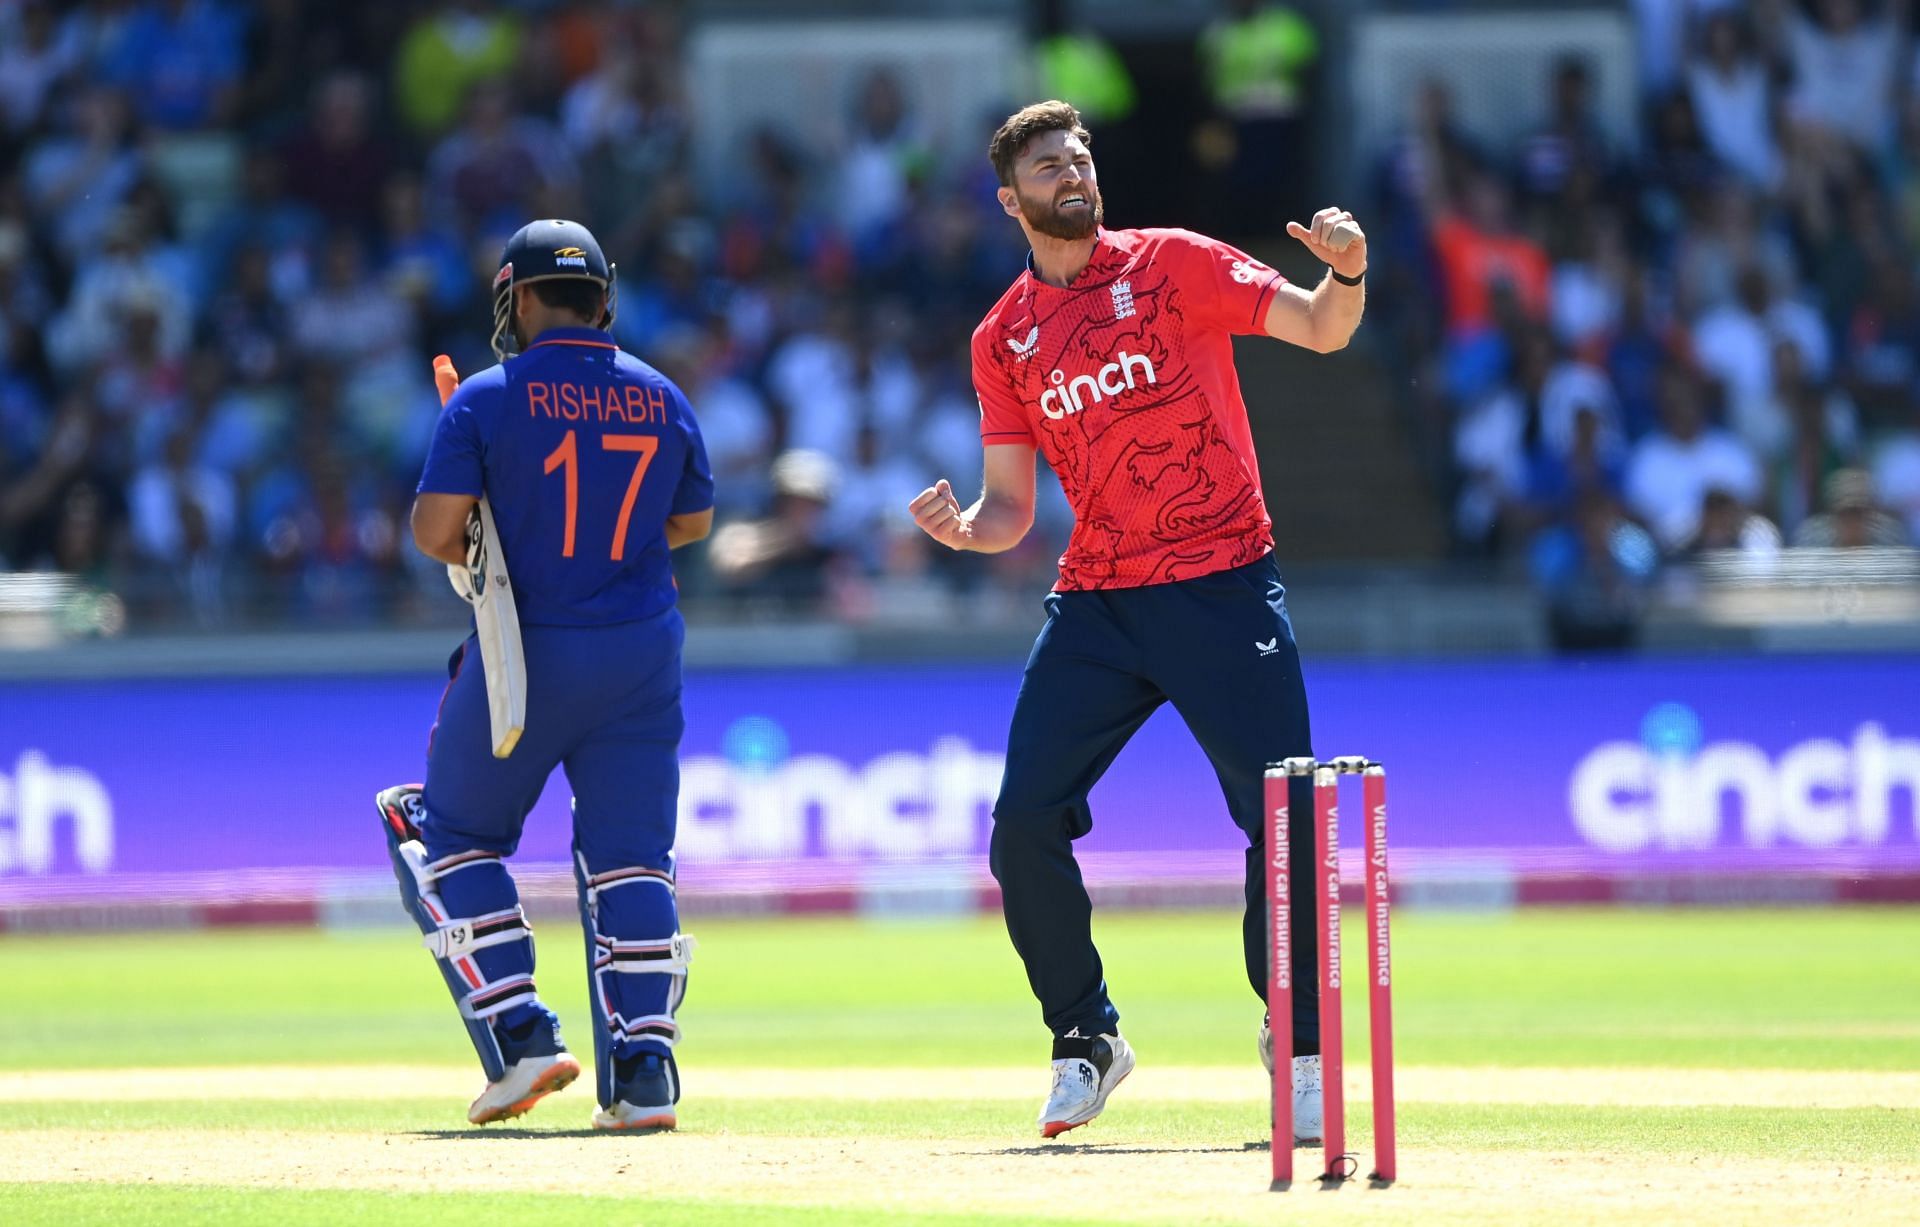 Richard Gleeson celebrates after taking the wicket of Rishabh Pant. Pic: Getty Images